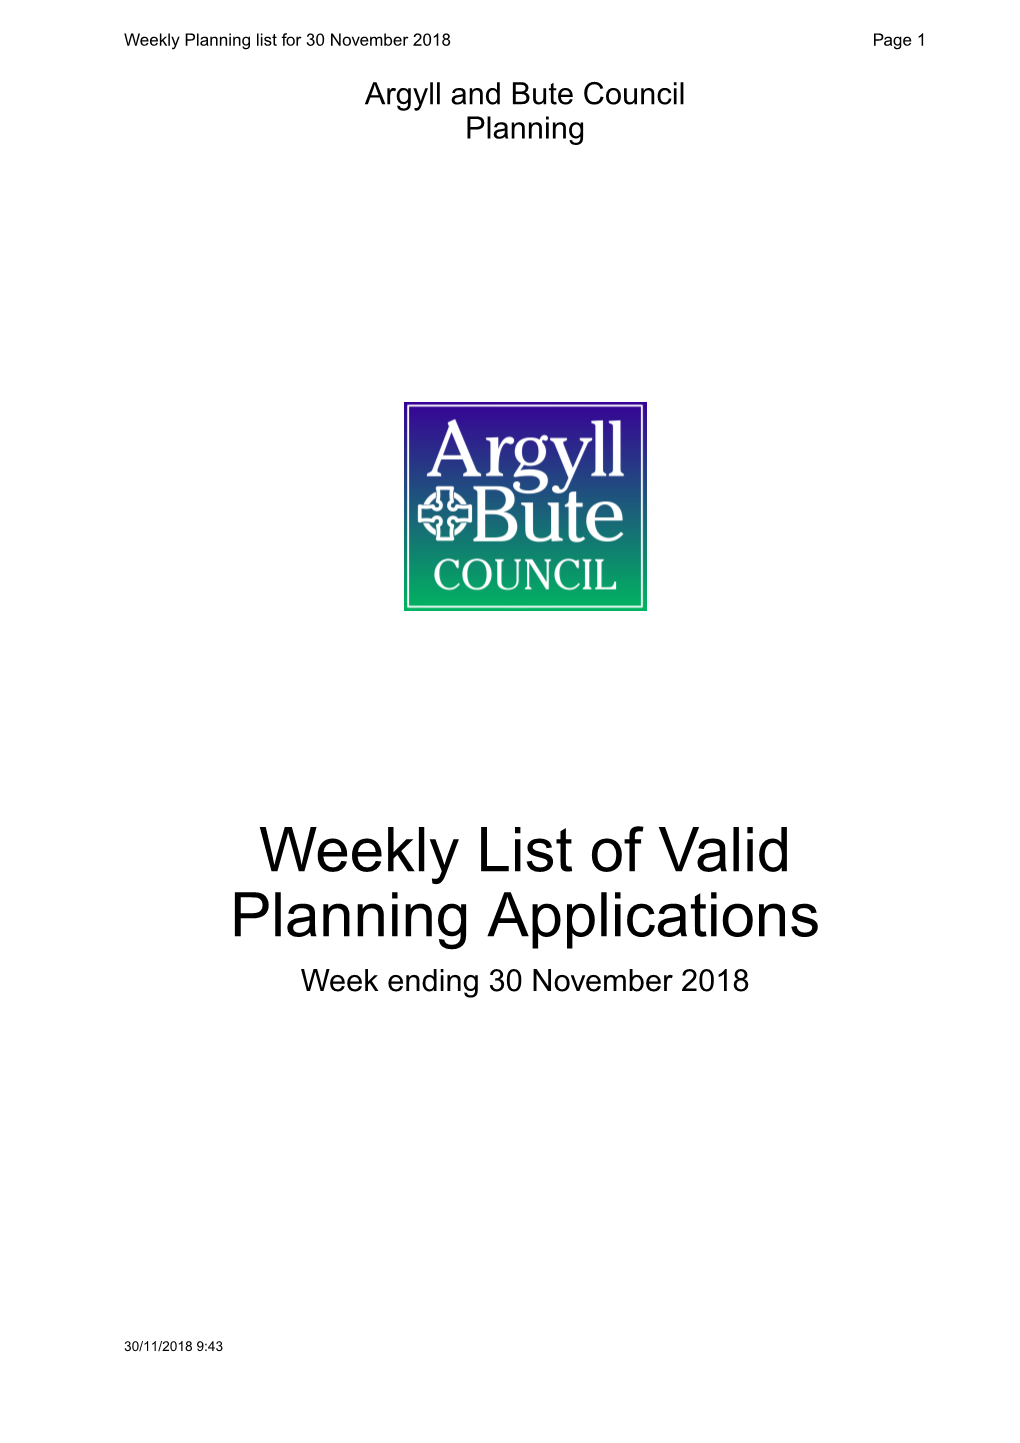 Weekly List of Valid Planning Applications 30Th November 2018.Pdf